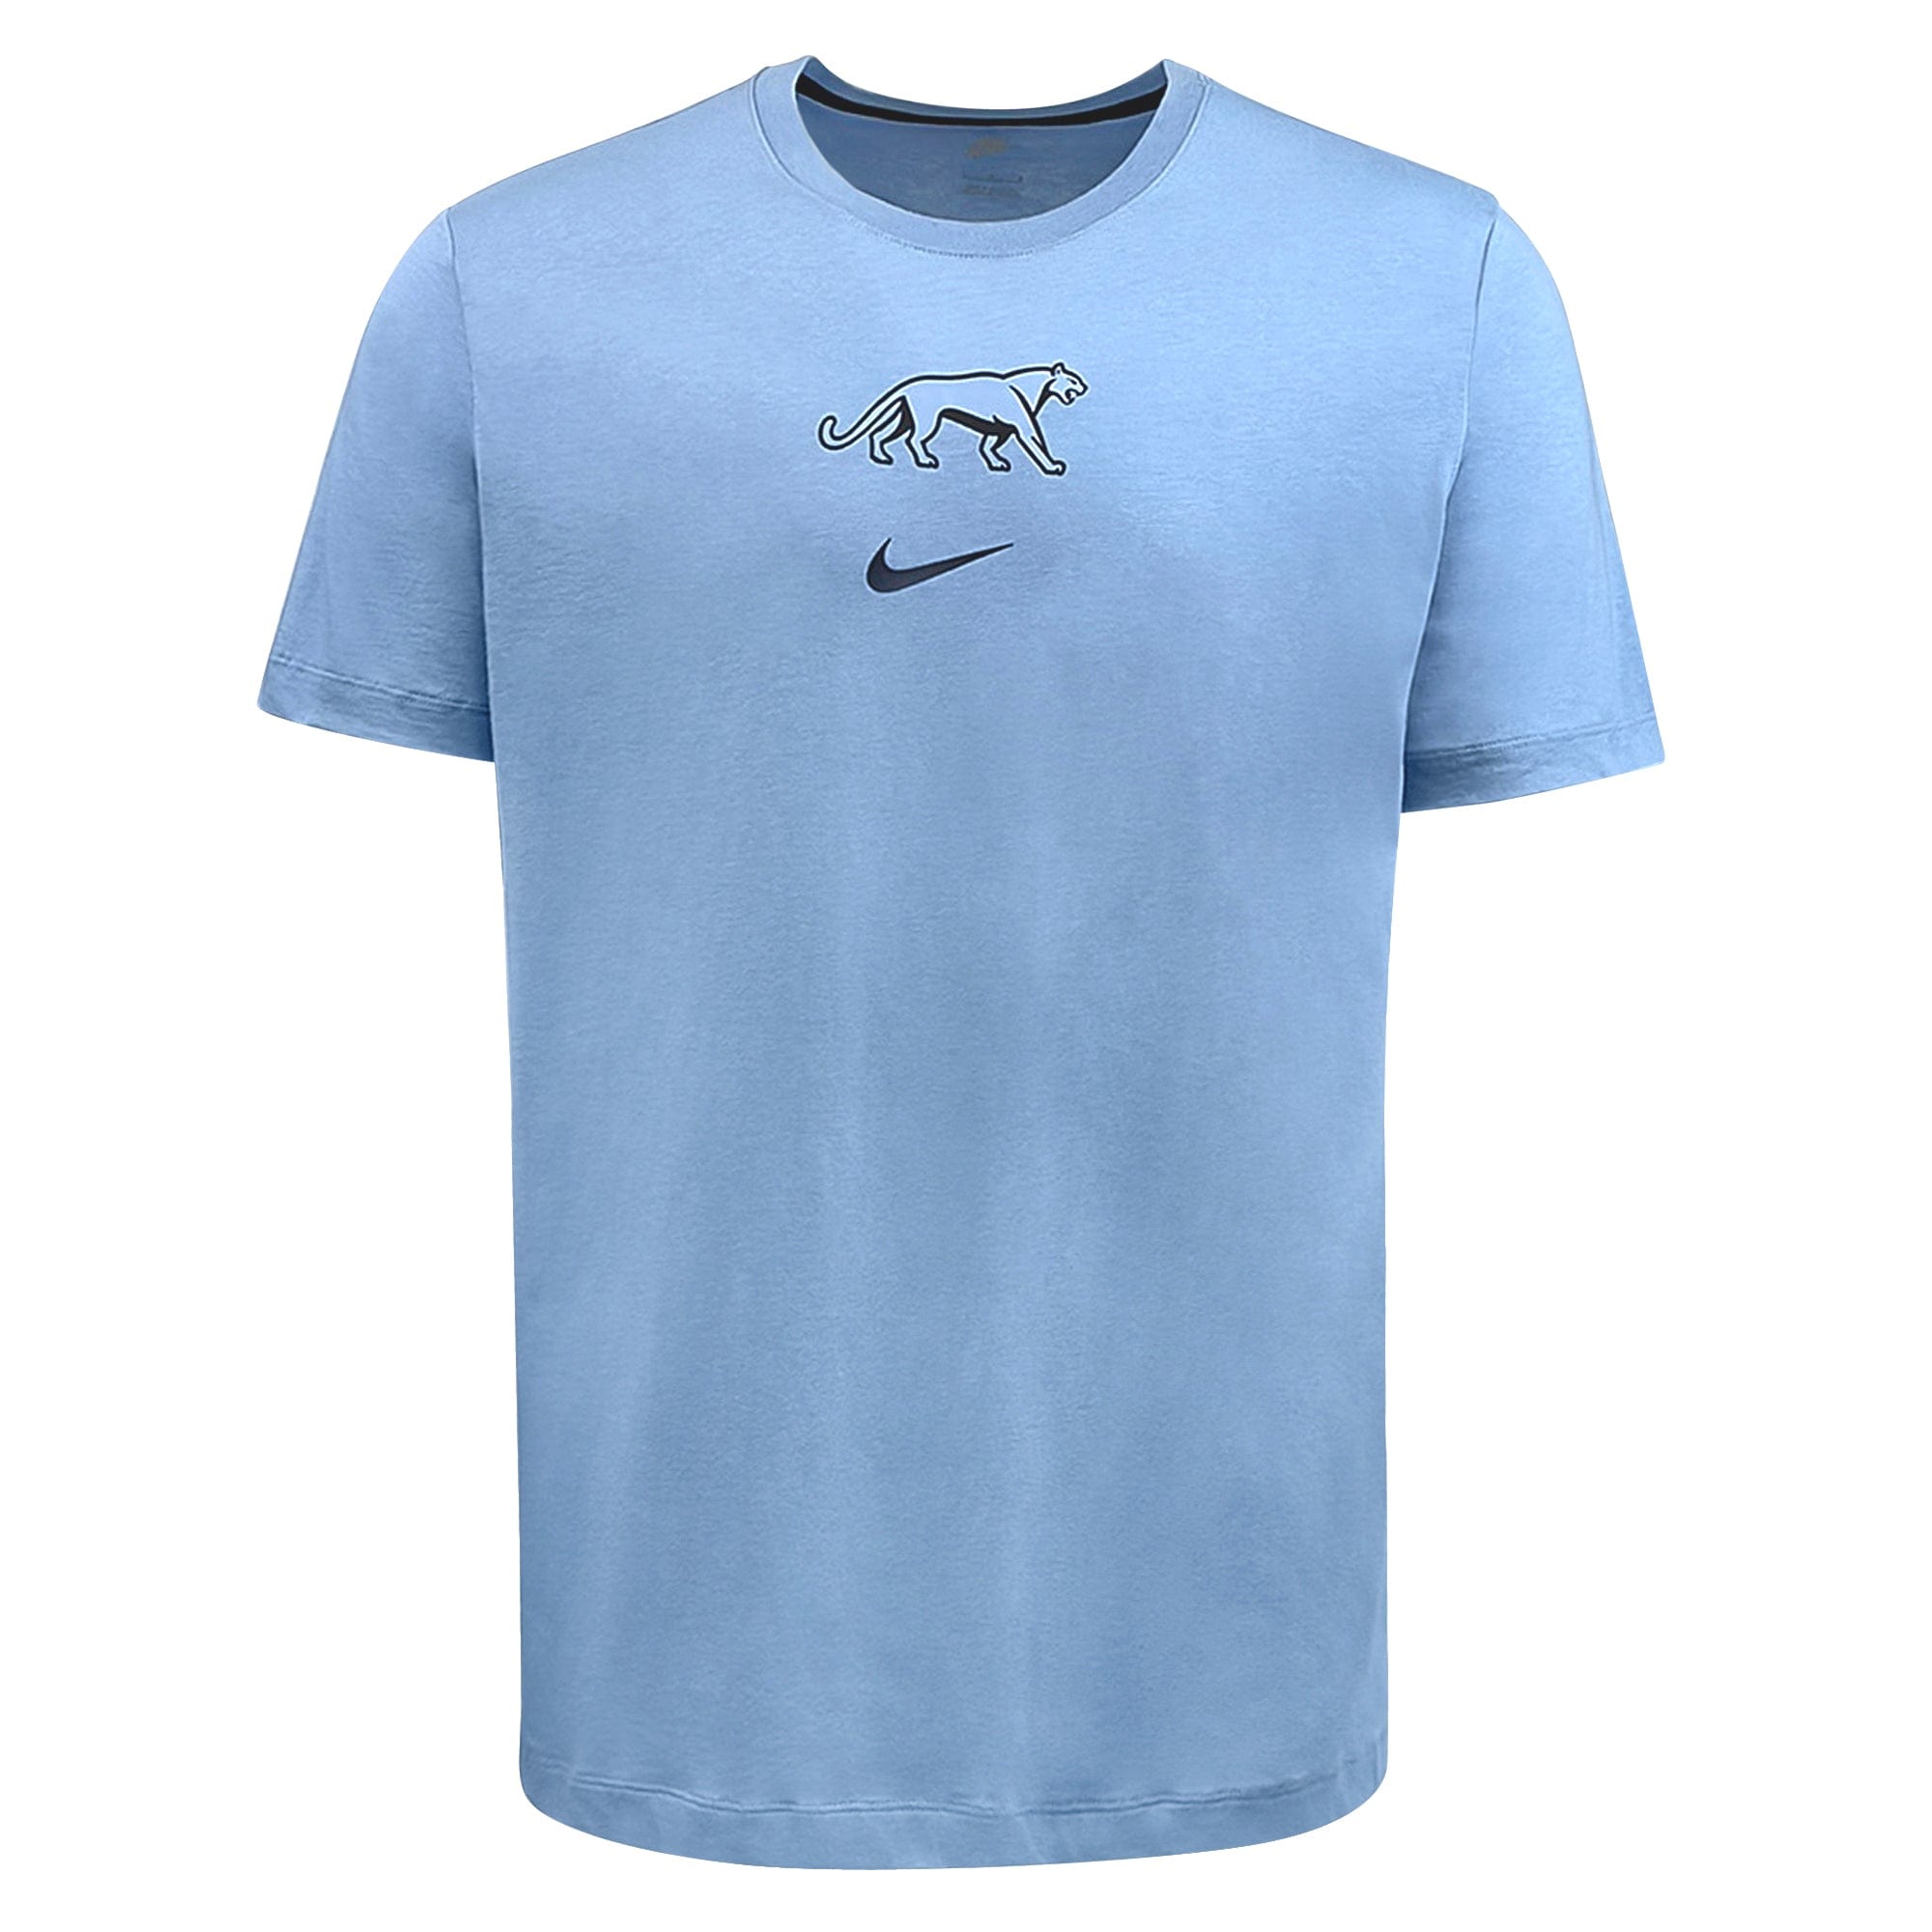 T-shirt Tee Shop 23/24 | - Argentina by Rugby Pumas Cotton Nike World Rugby